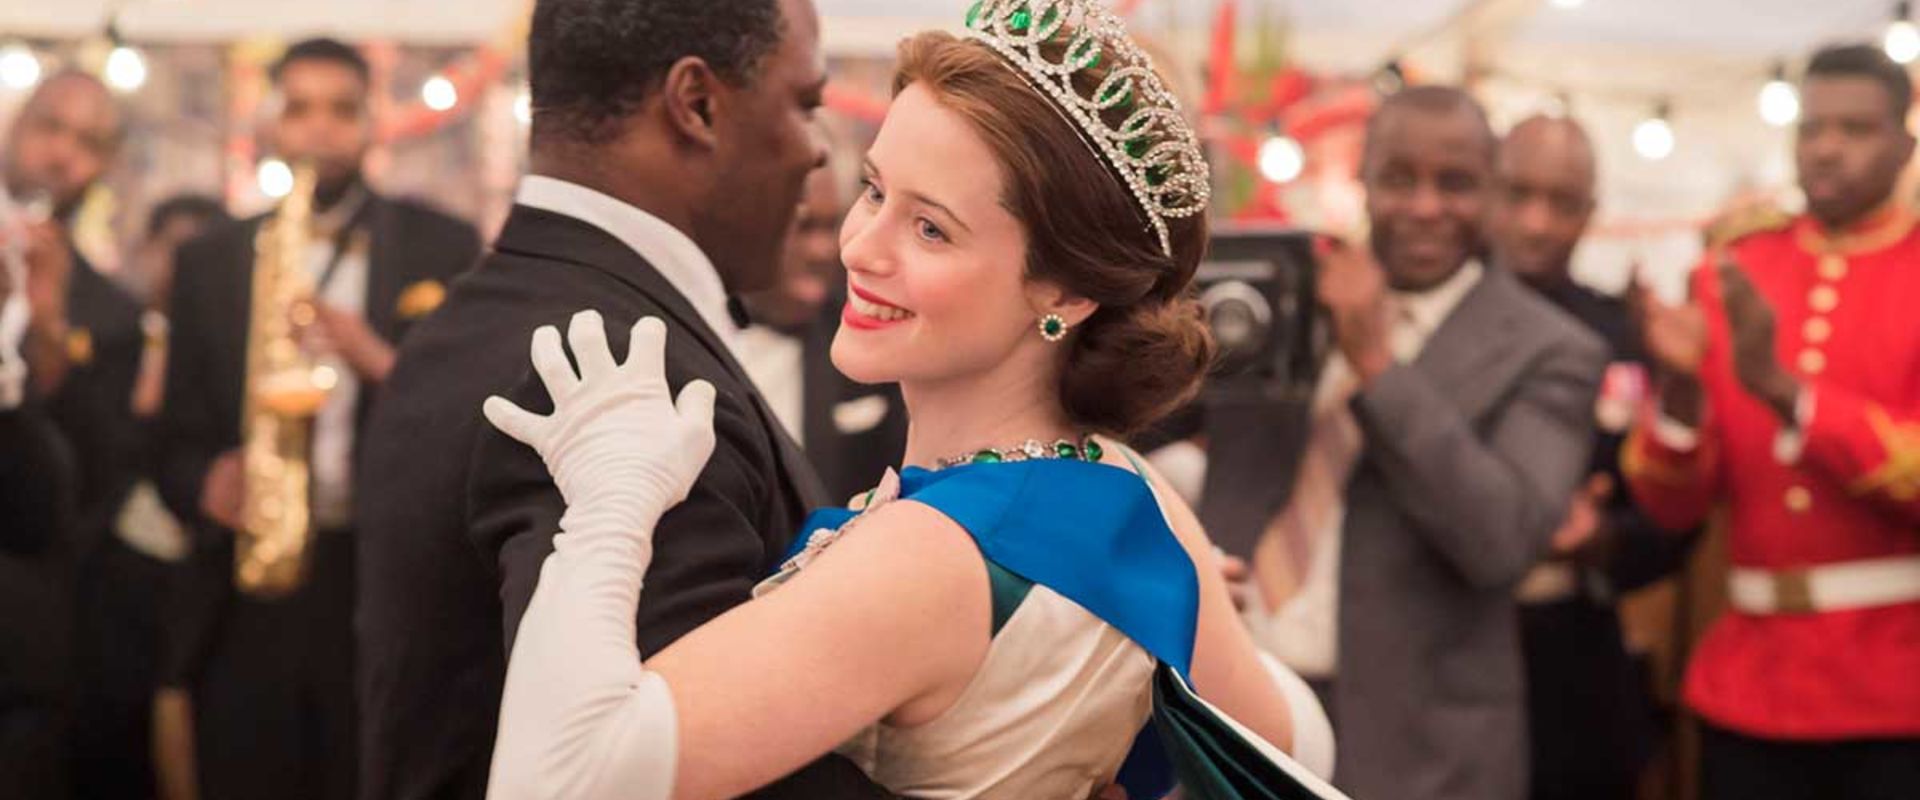 13 Emmy Nominations For The Crown Left Bank Pictures